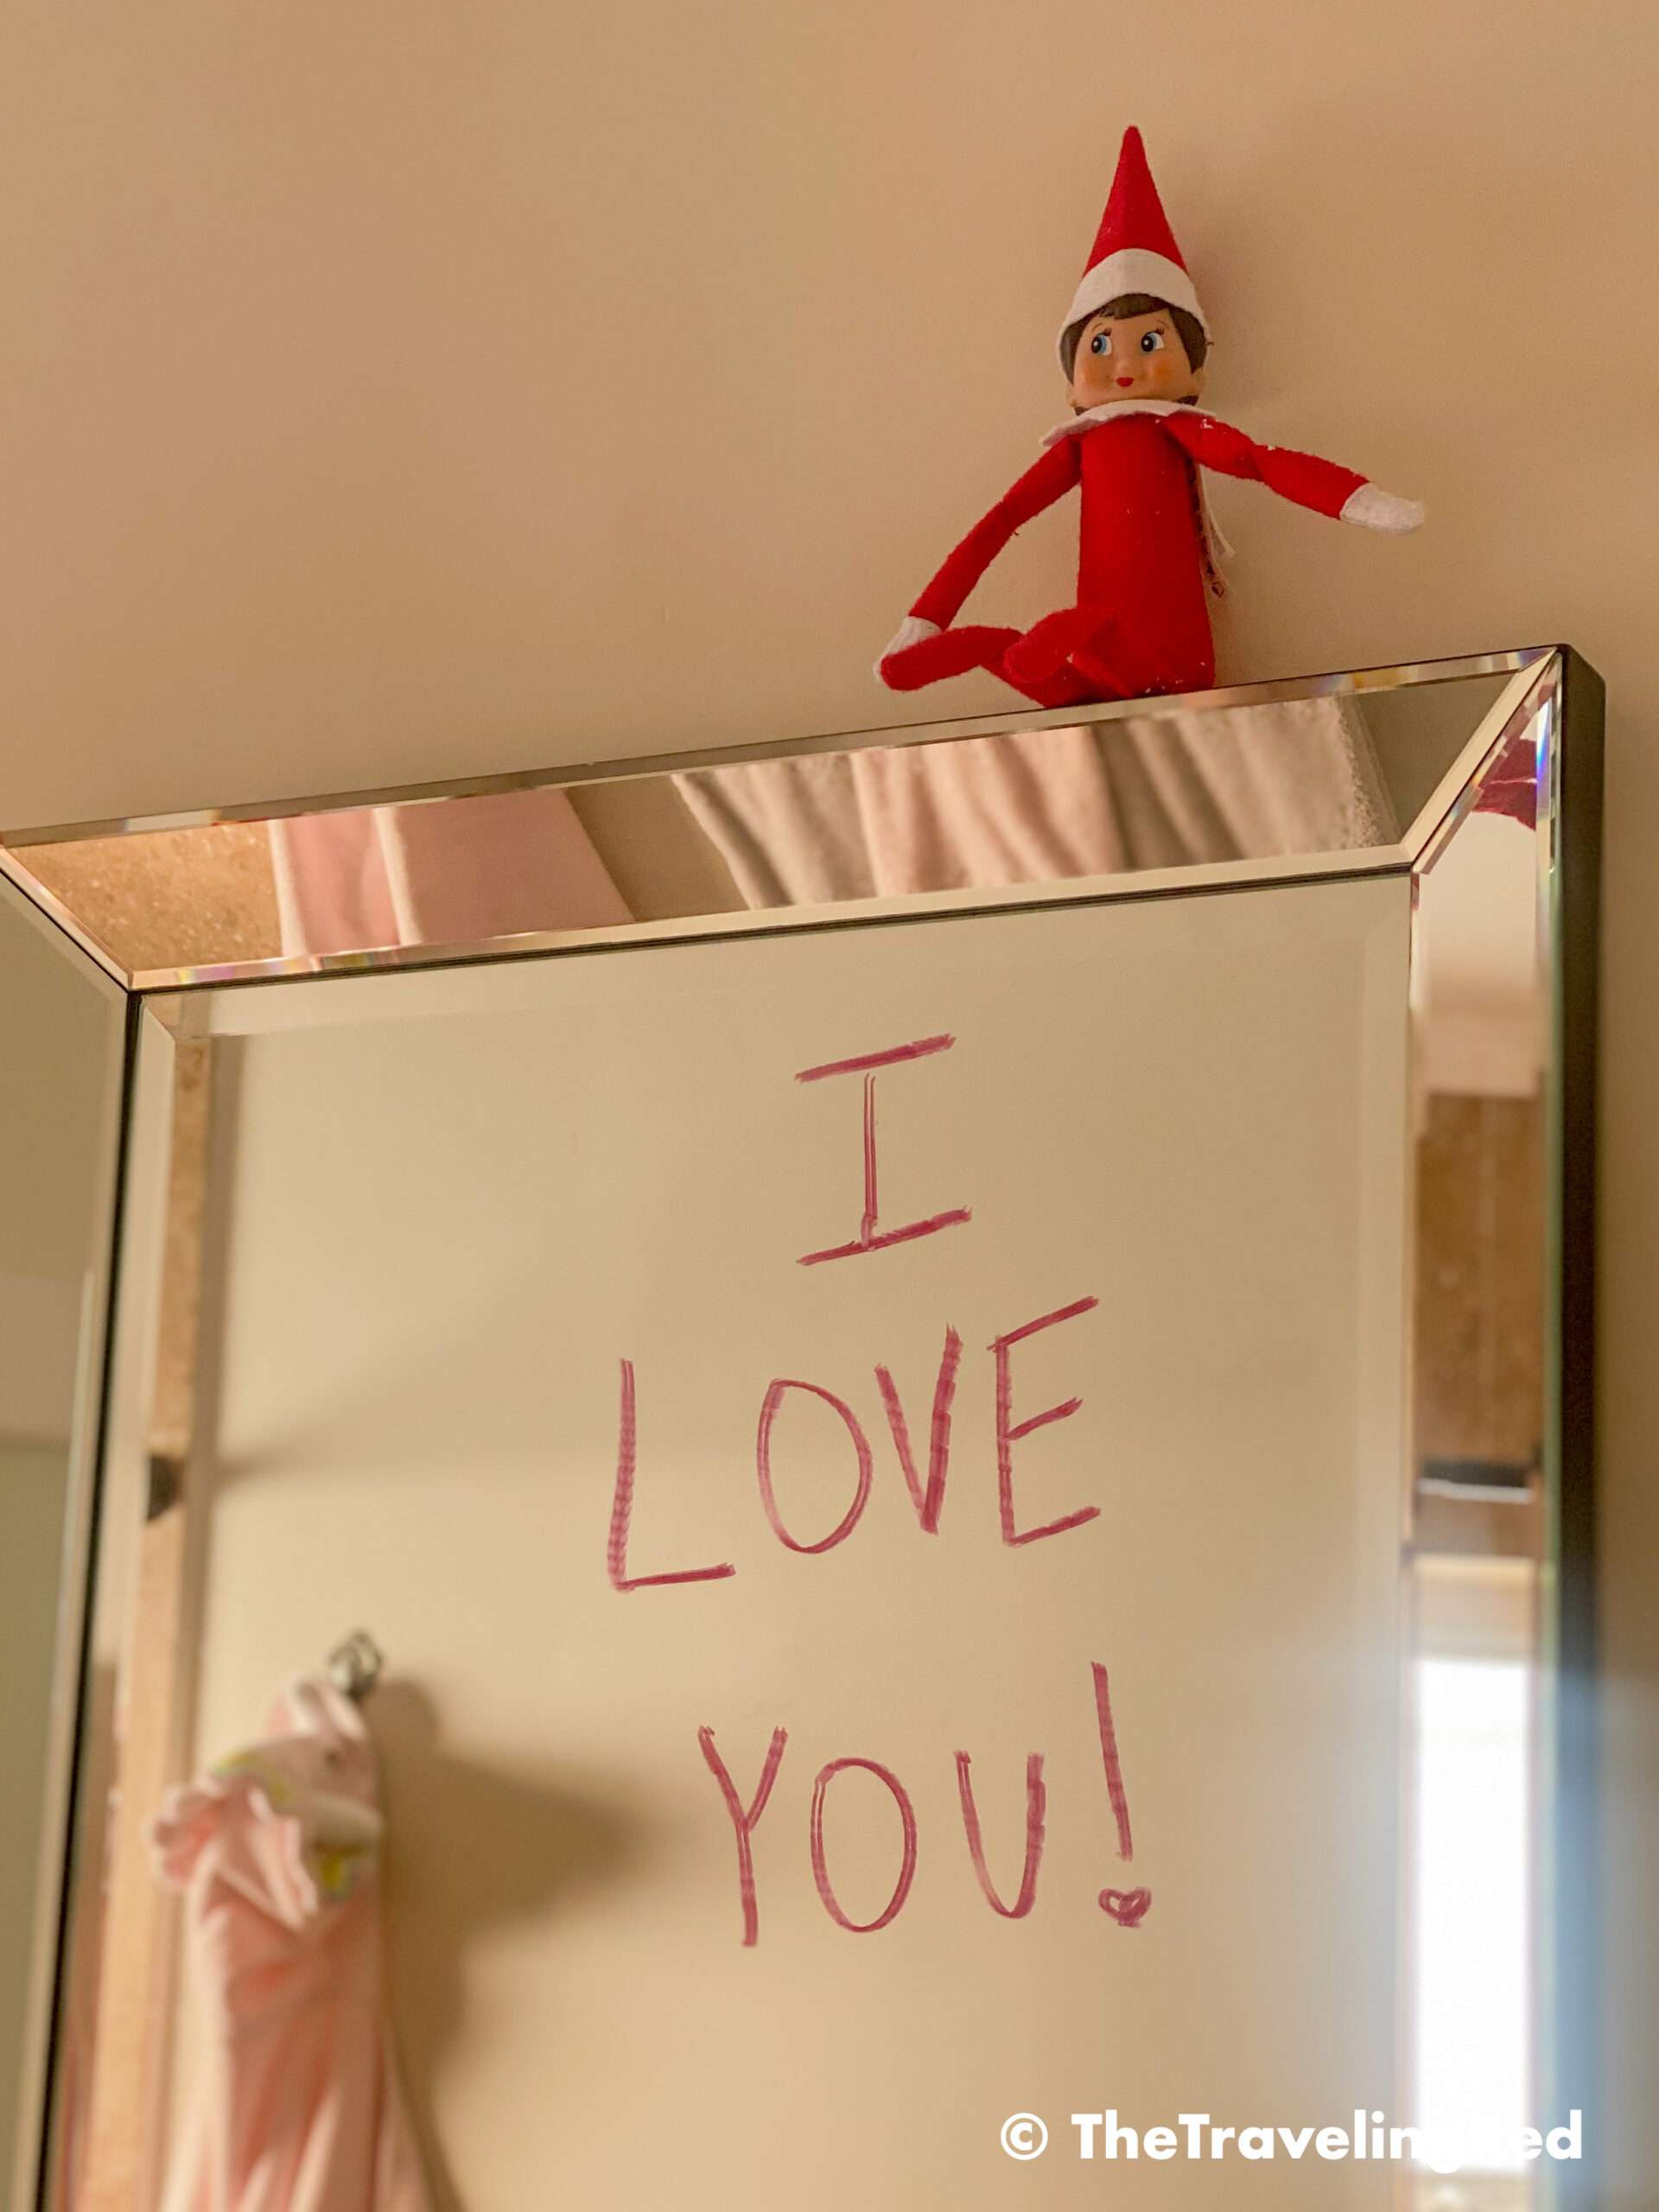 Naughty Elf on the shelf wrote a note on the bathroom mirror using mommy's red lipstick. Fun and easy elf on the shelf ideas for a naughty elf that are quick and easy using things you have at home.